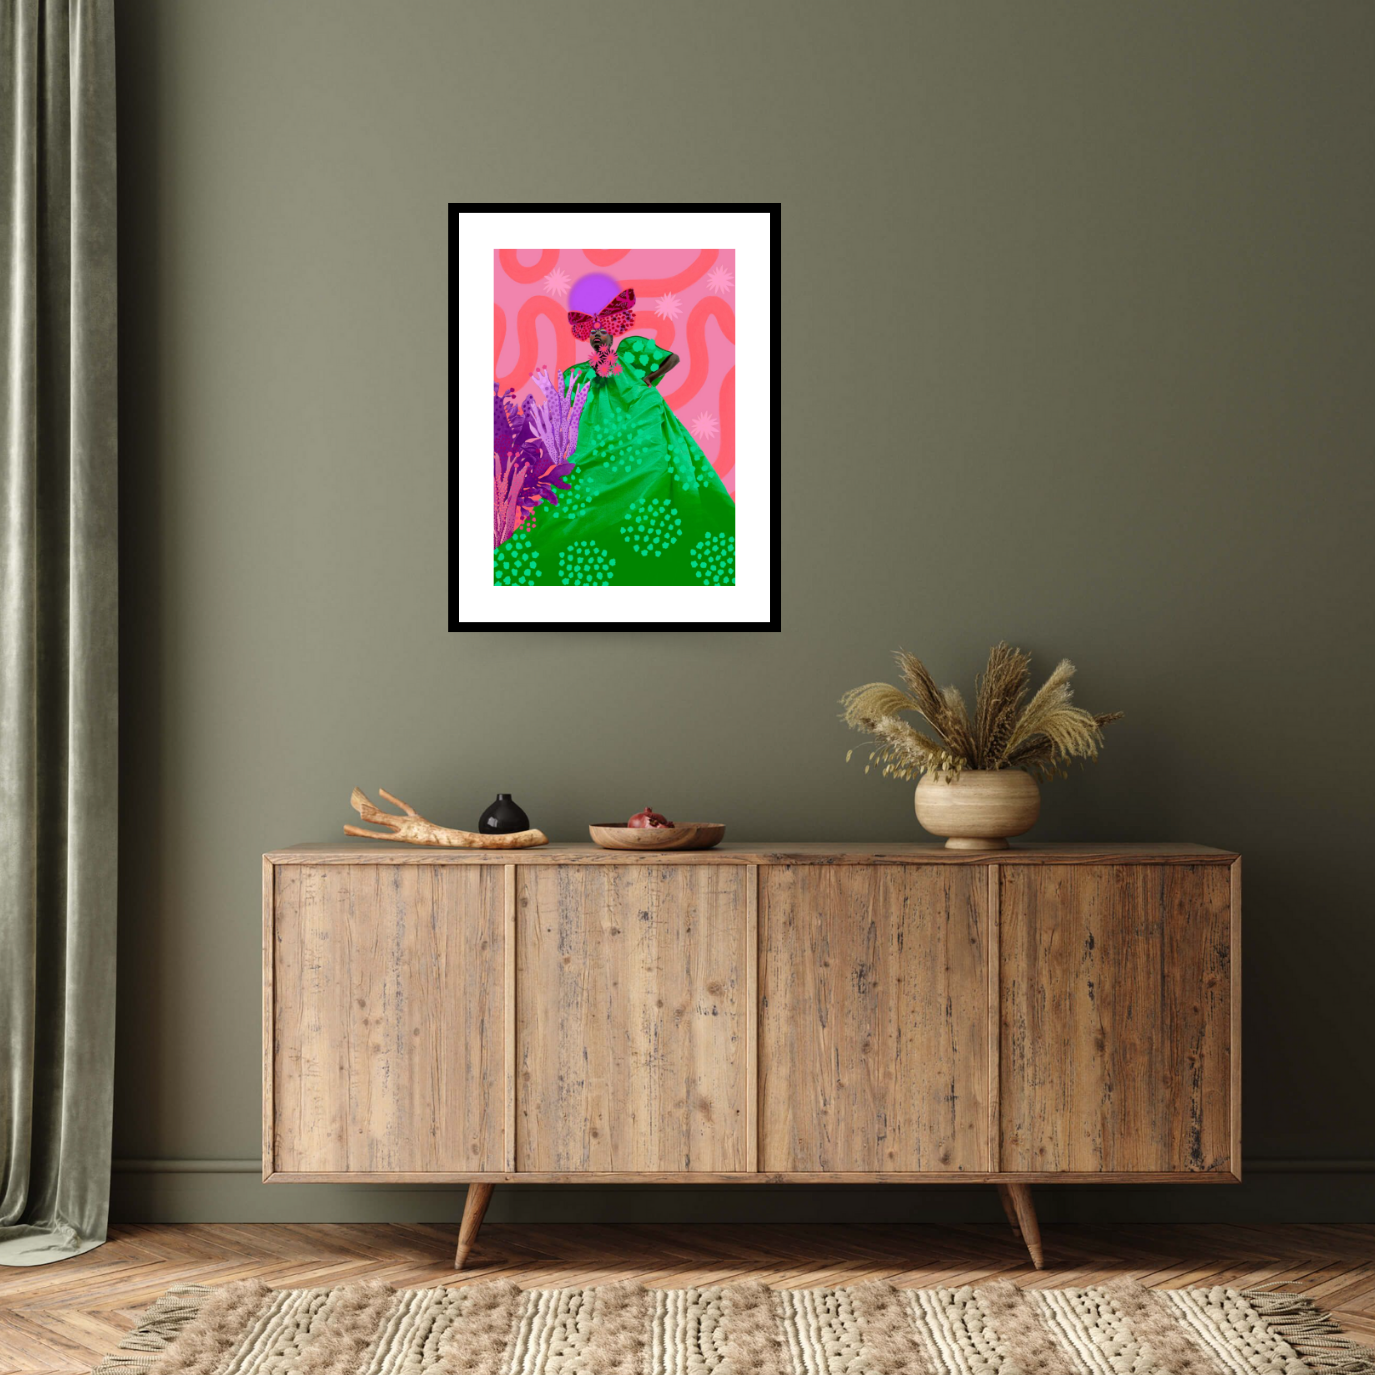 Image of the black framed  fine art print ‘Alais’ by the Contemporary artist Amber Elise, depicting a black woman wearing a long green dress and a butterfly shaped hat, standing on a bright pink background.